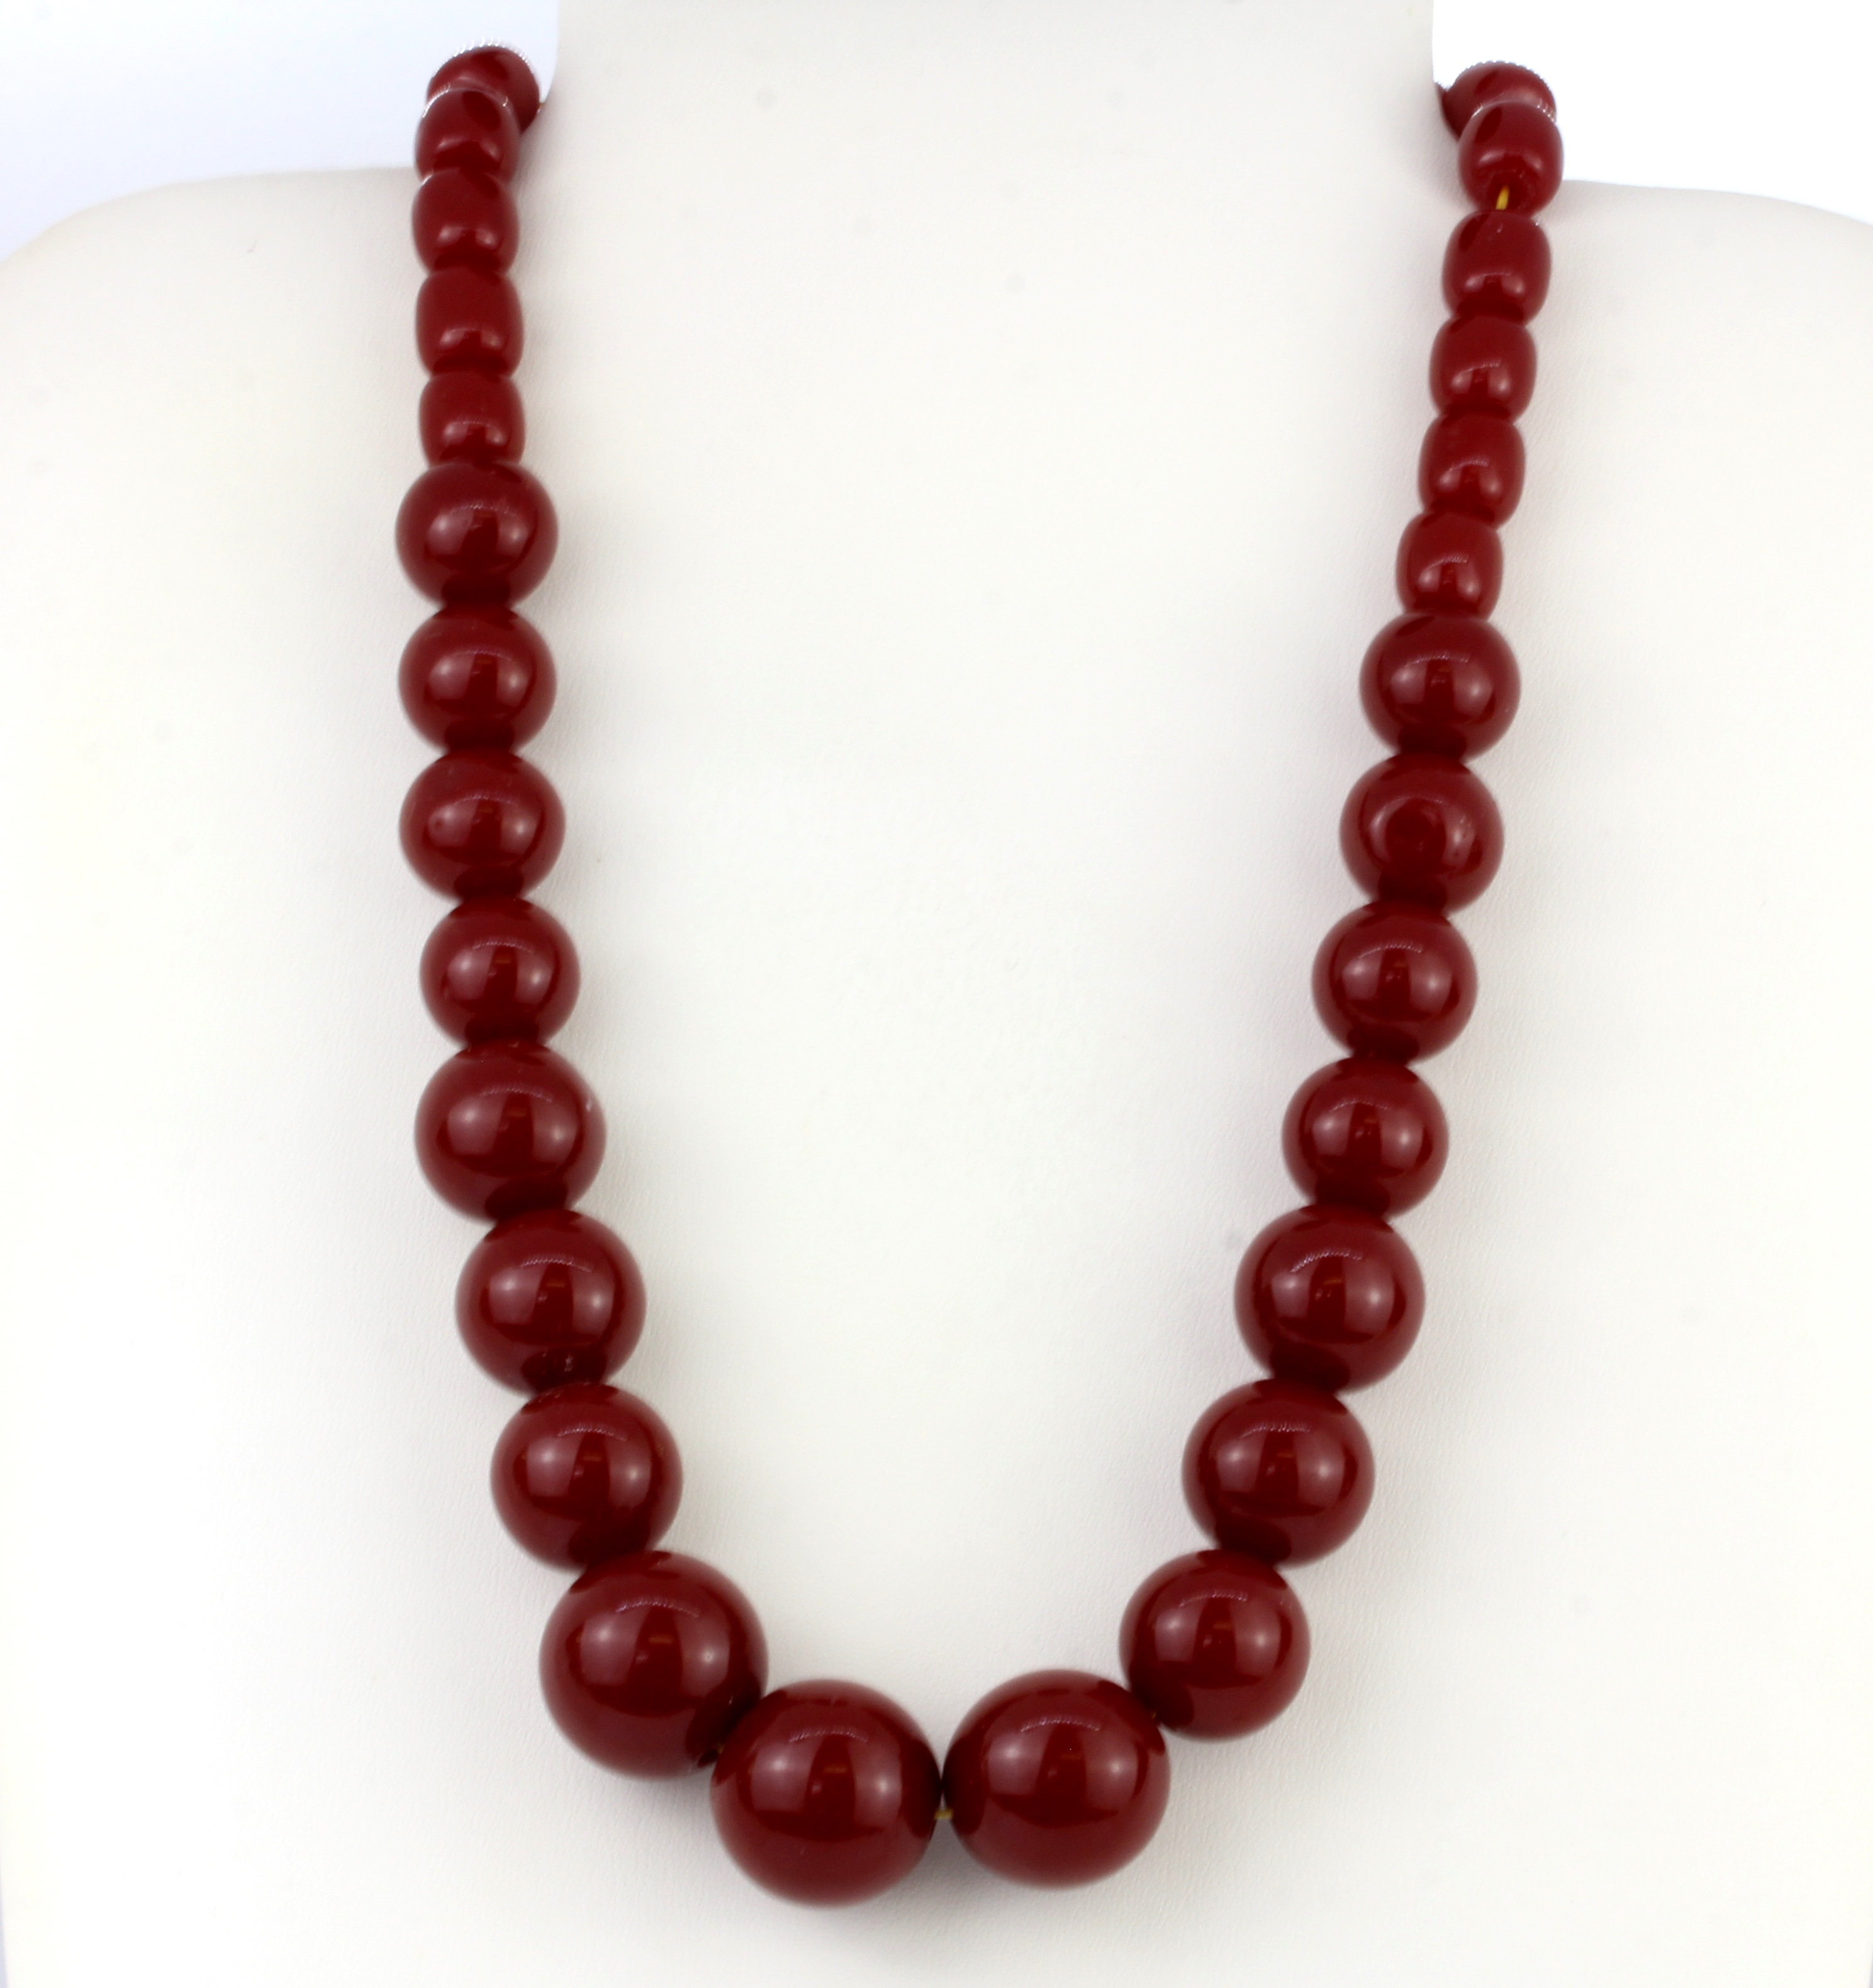 A graduated red bead necklace, L. 50cm. - Image 2 of 2